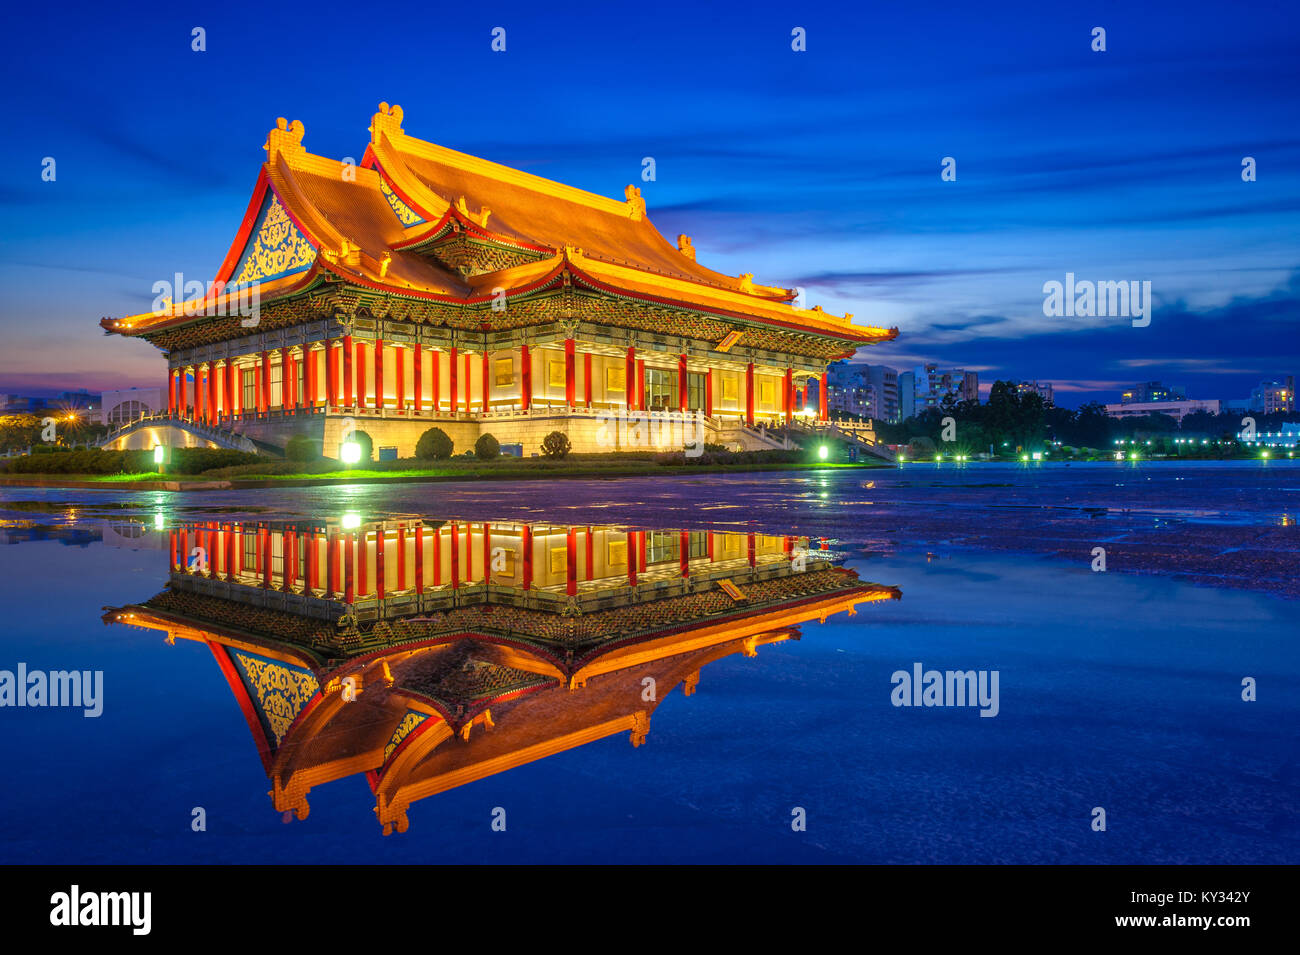 night scene of National Theater and Concert Hall Stock Photo